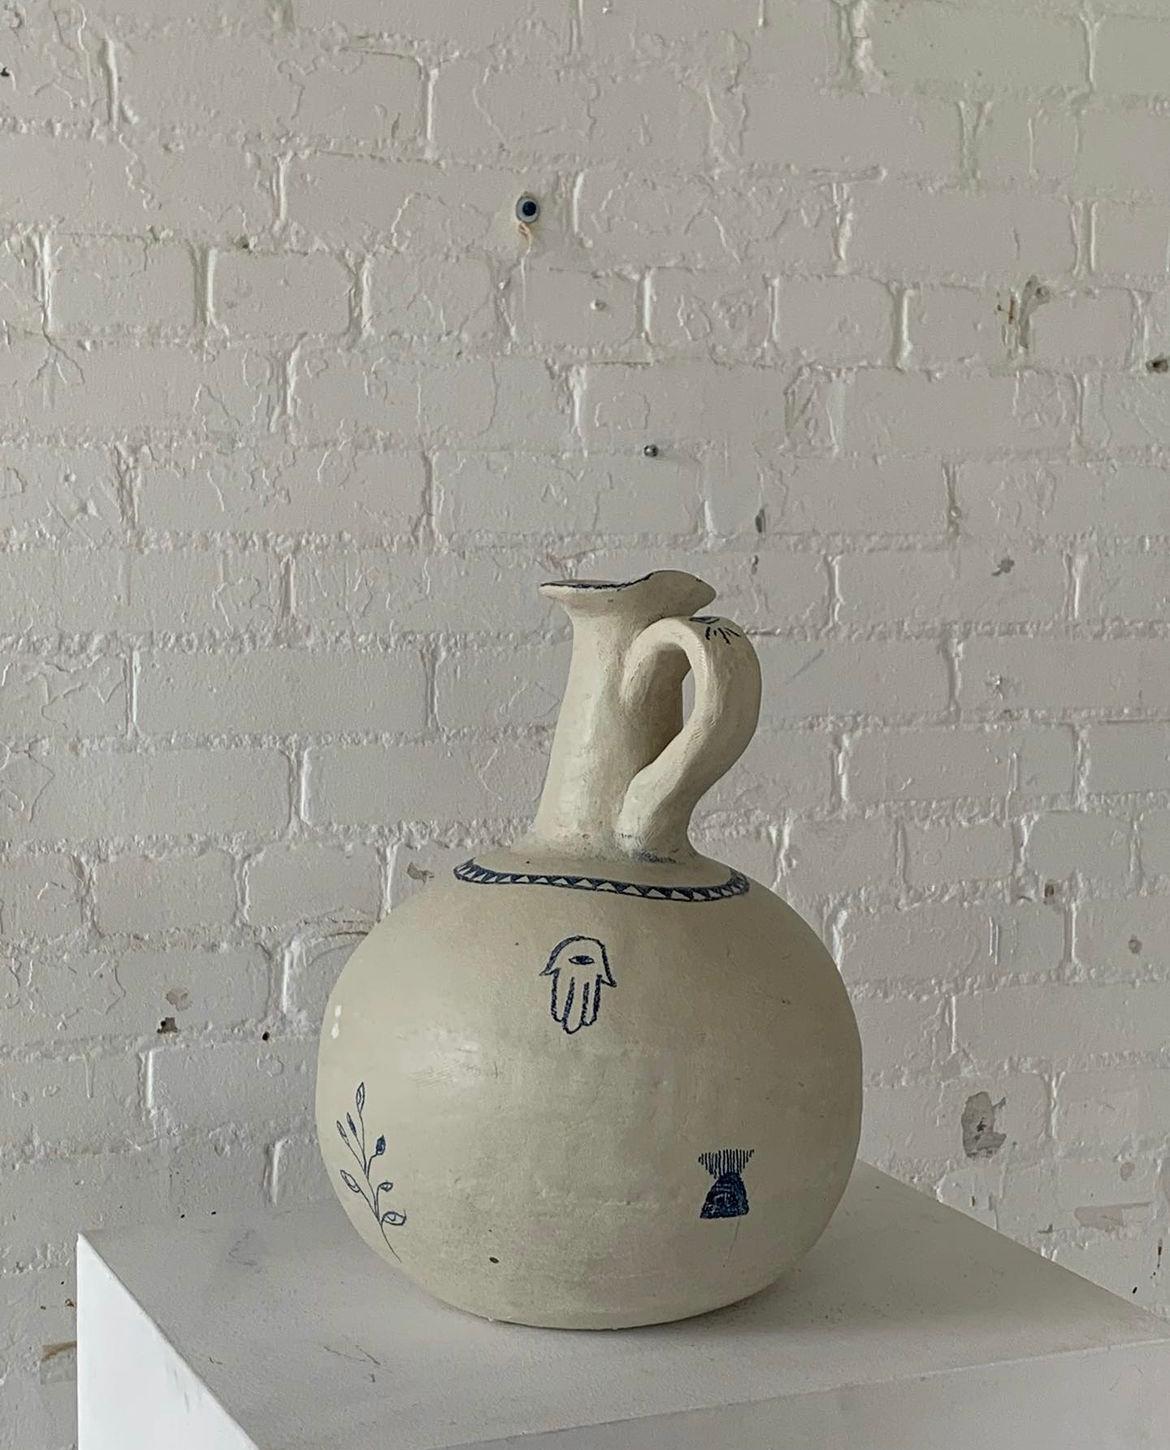 Protector vase 1 by Solem Ceramics
Dimensions: Ø 25.5 x H 35.5 cm.
Materials: White stoneware, blue underglaze, glaze
This vase is water safe. 

Solem’s work pulls from memories of the architecture and community within SWANA and Southeast Asia